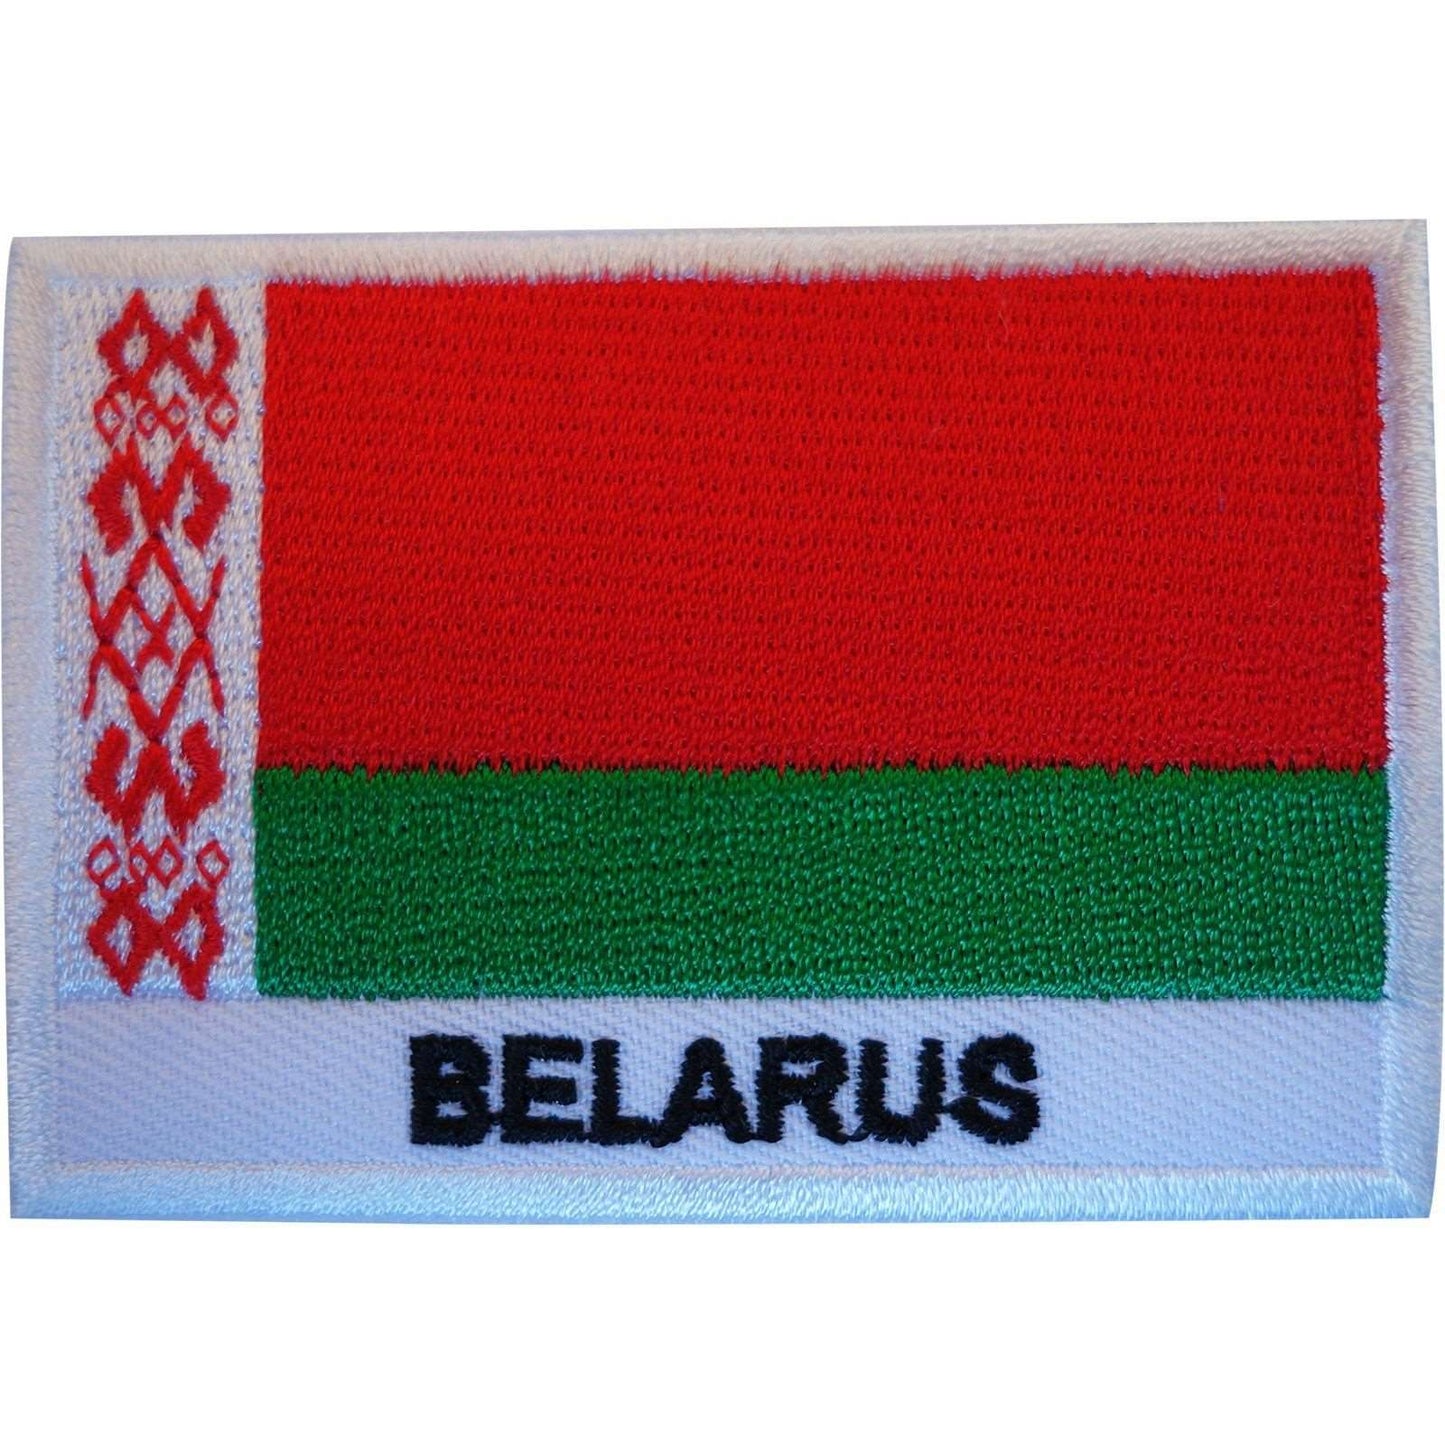 Belarus Flag Patch Iron On Sew On Badge Clothes Bag Embroidered Applique Motif